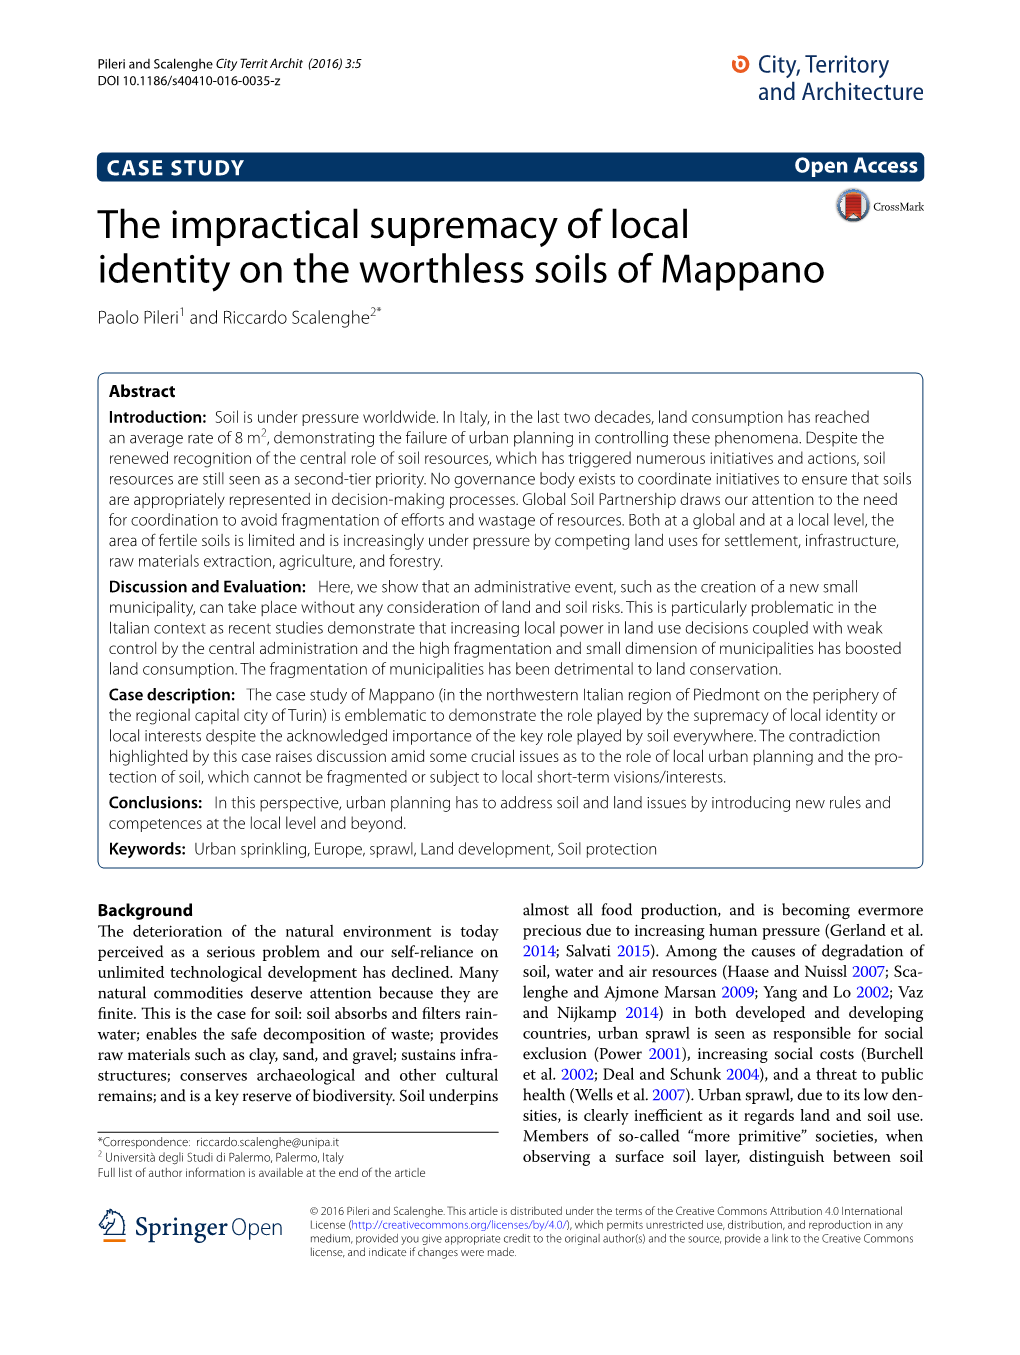 The Impractical Supremacy of Local Identity on the Worthless Soils of Mappano Paolo Pileri1 and Riccardo Scalenghe2*